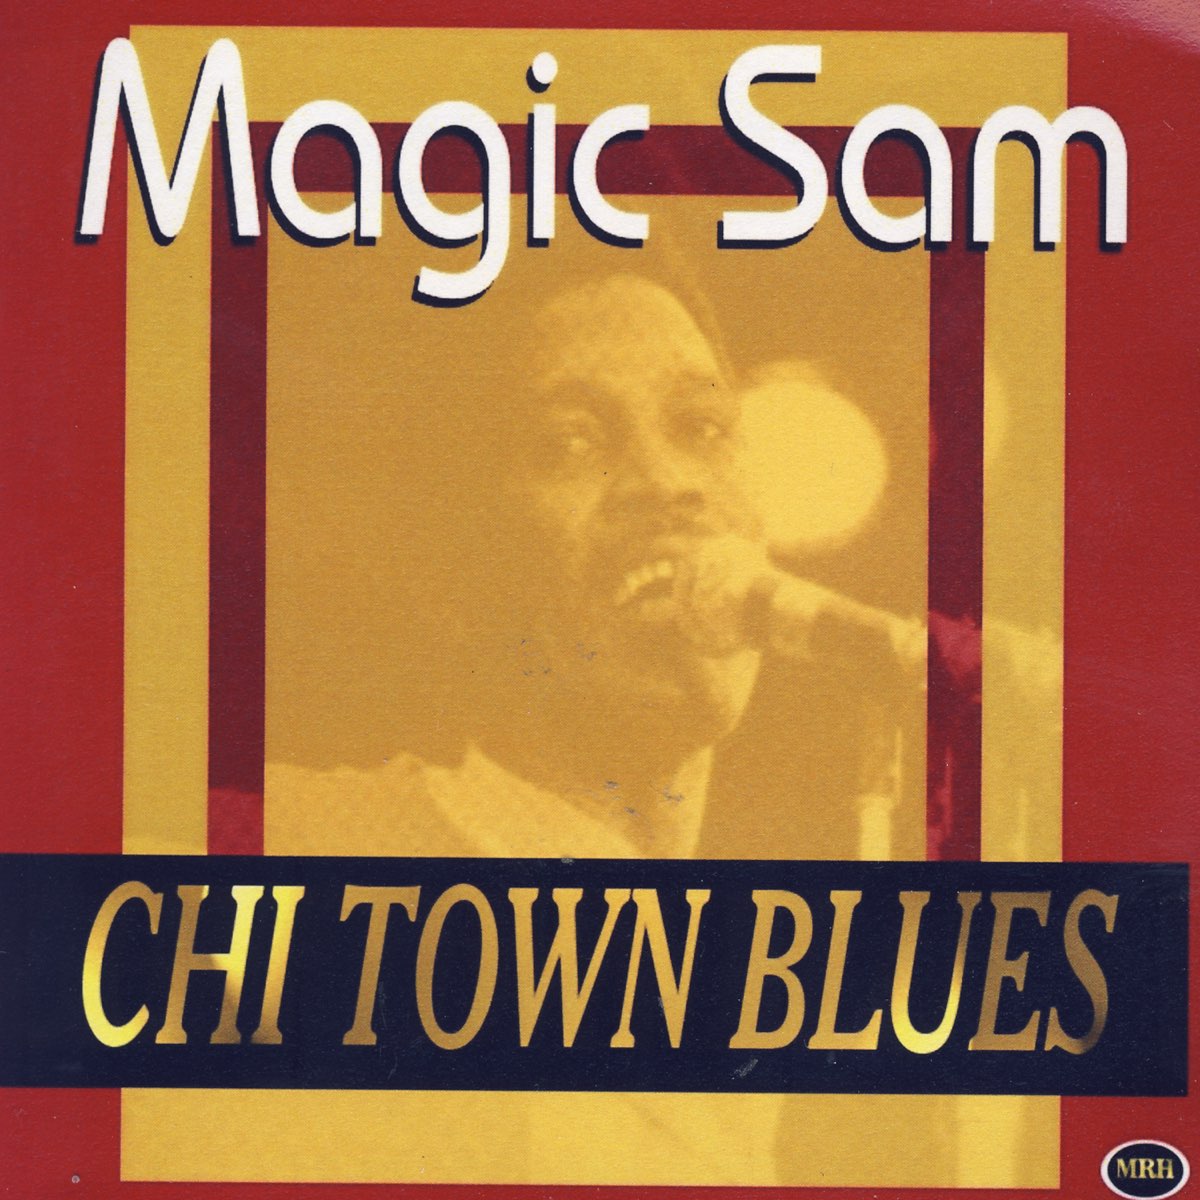 ‎Chi Town Blues by Magic Sam on Apple Music